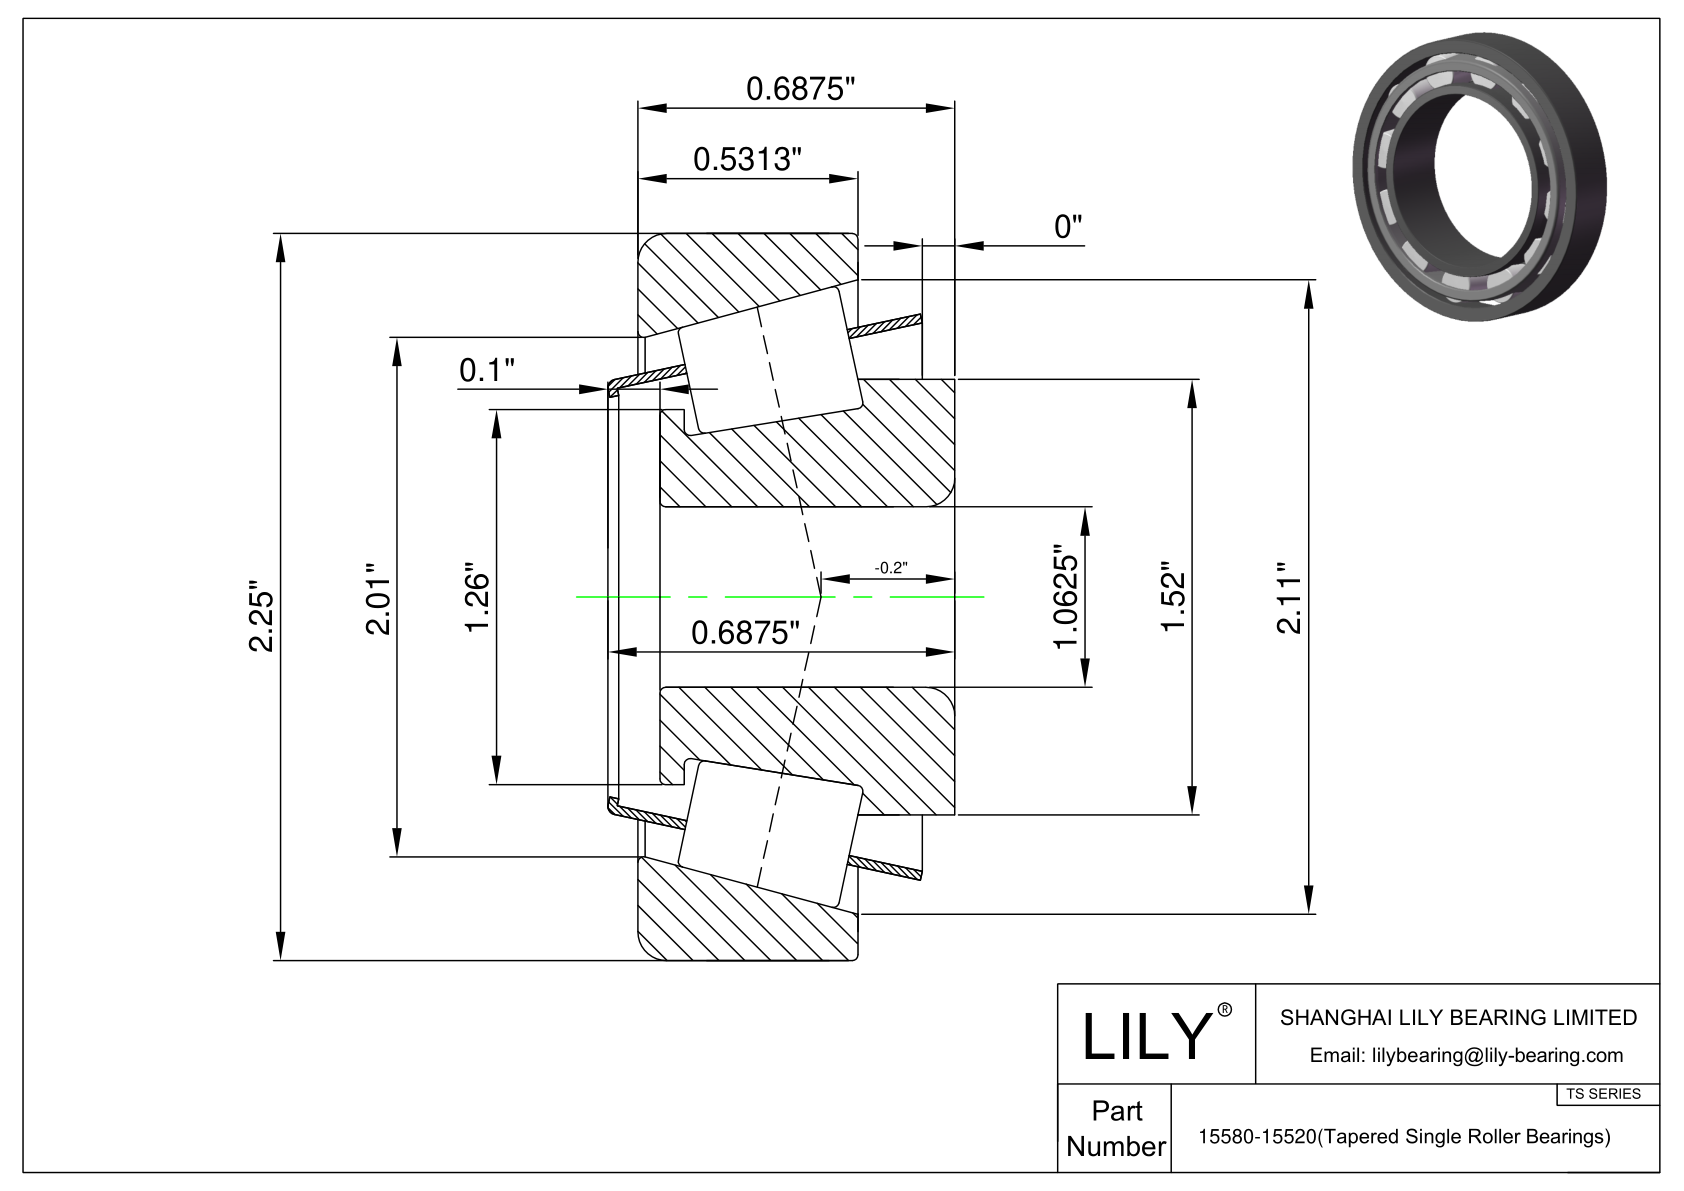 15580-15520 TS (Tapered Single Roller Bearings) (Imperial) cad drawing